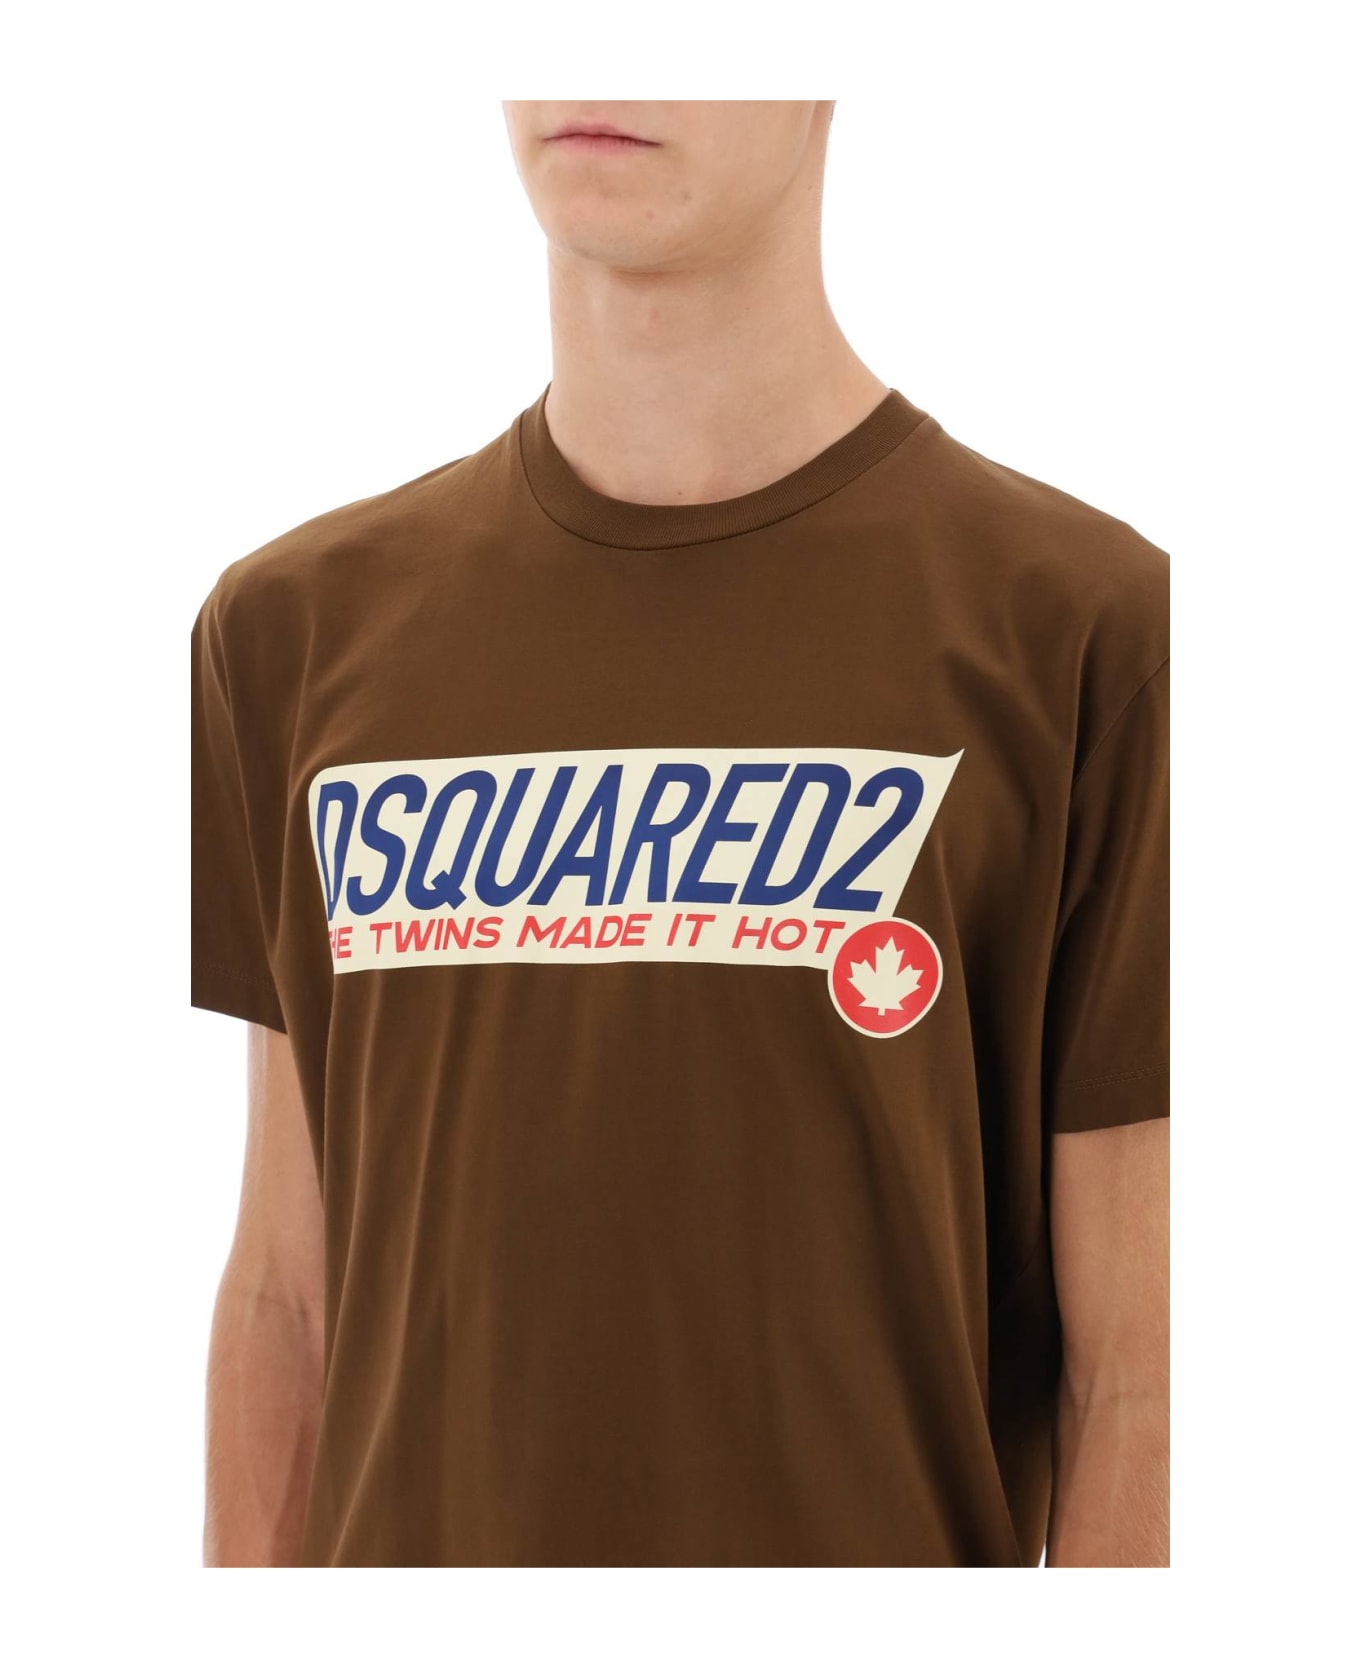 Dsquared2 Cool Fit Printed Tee - BROWN シャツ